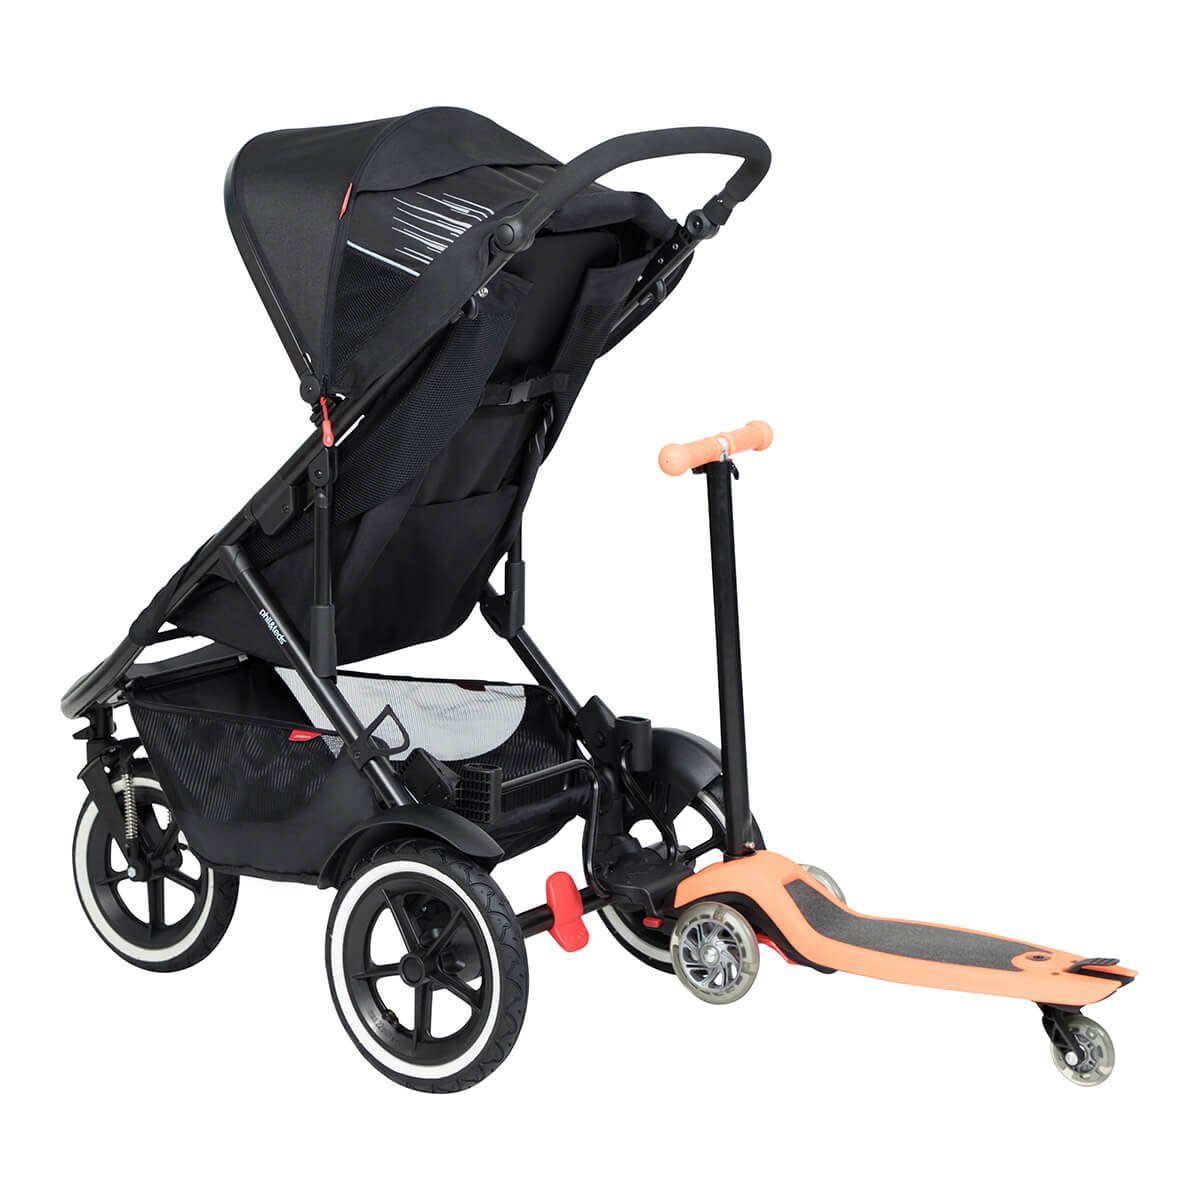 https://cdn.accentuate.io/4509898735693/19466204315842/philteds-sport-buggy-with-freerider-stroller-board-in-rear-v1626485359957.jpg?1200x1200